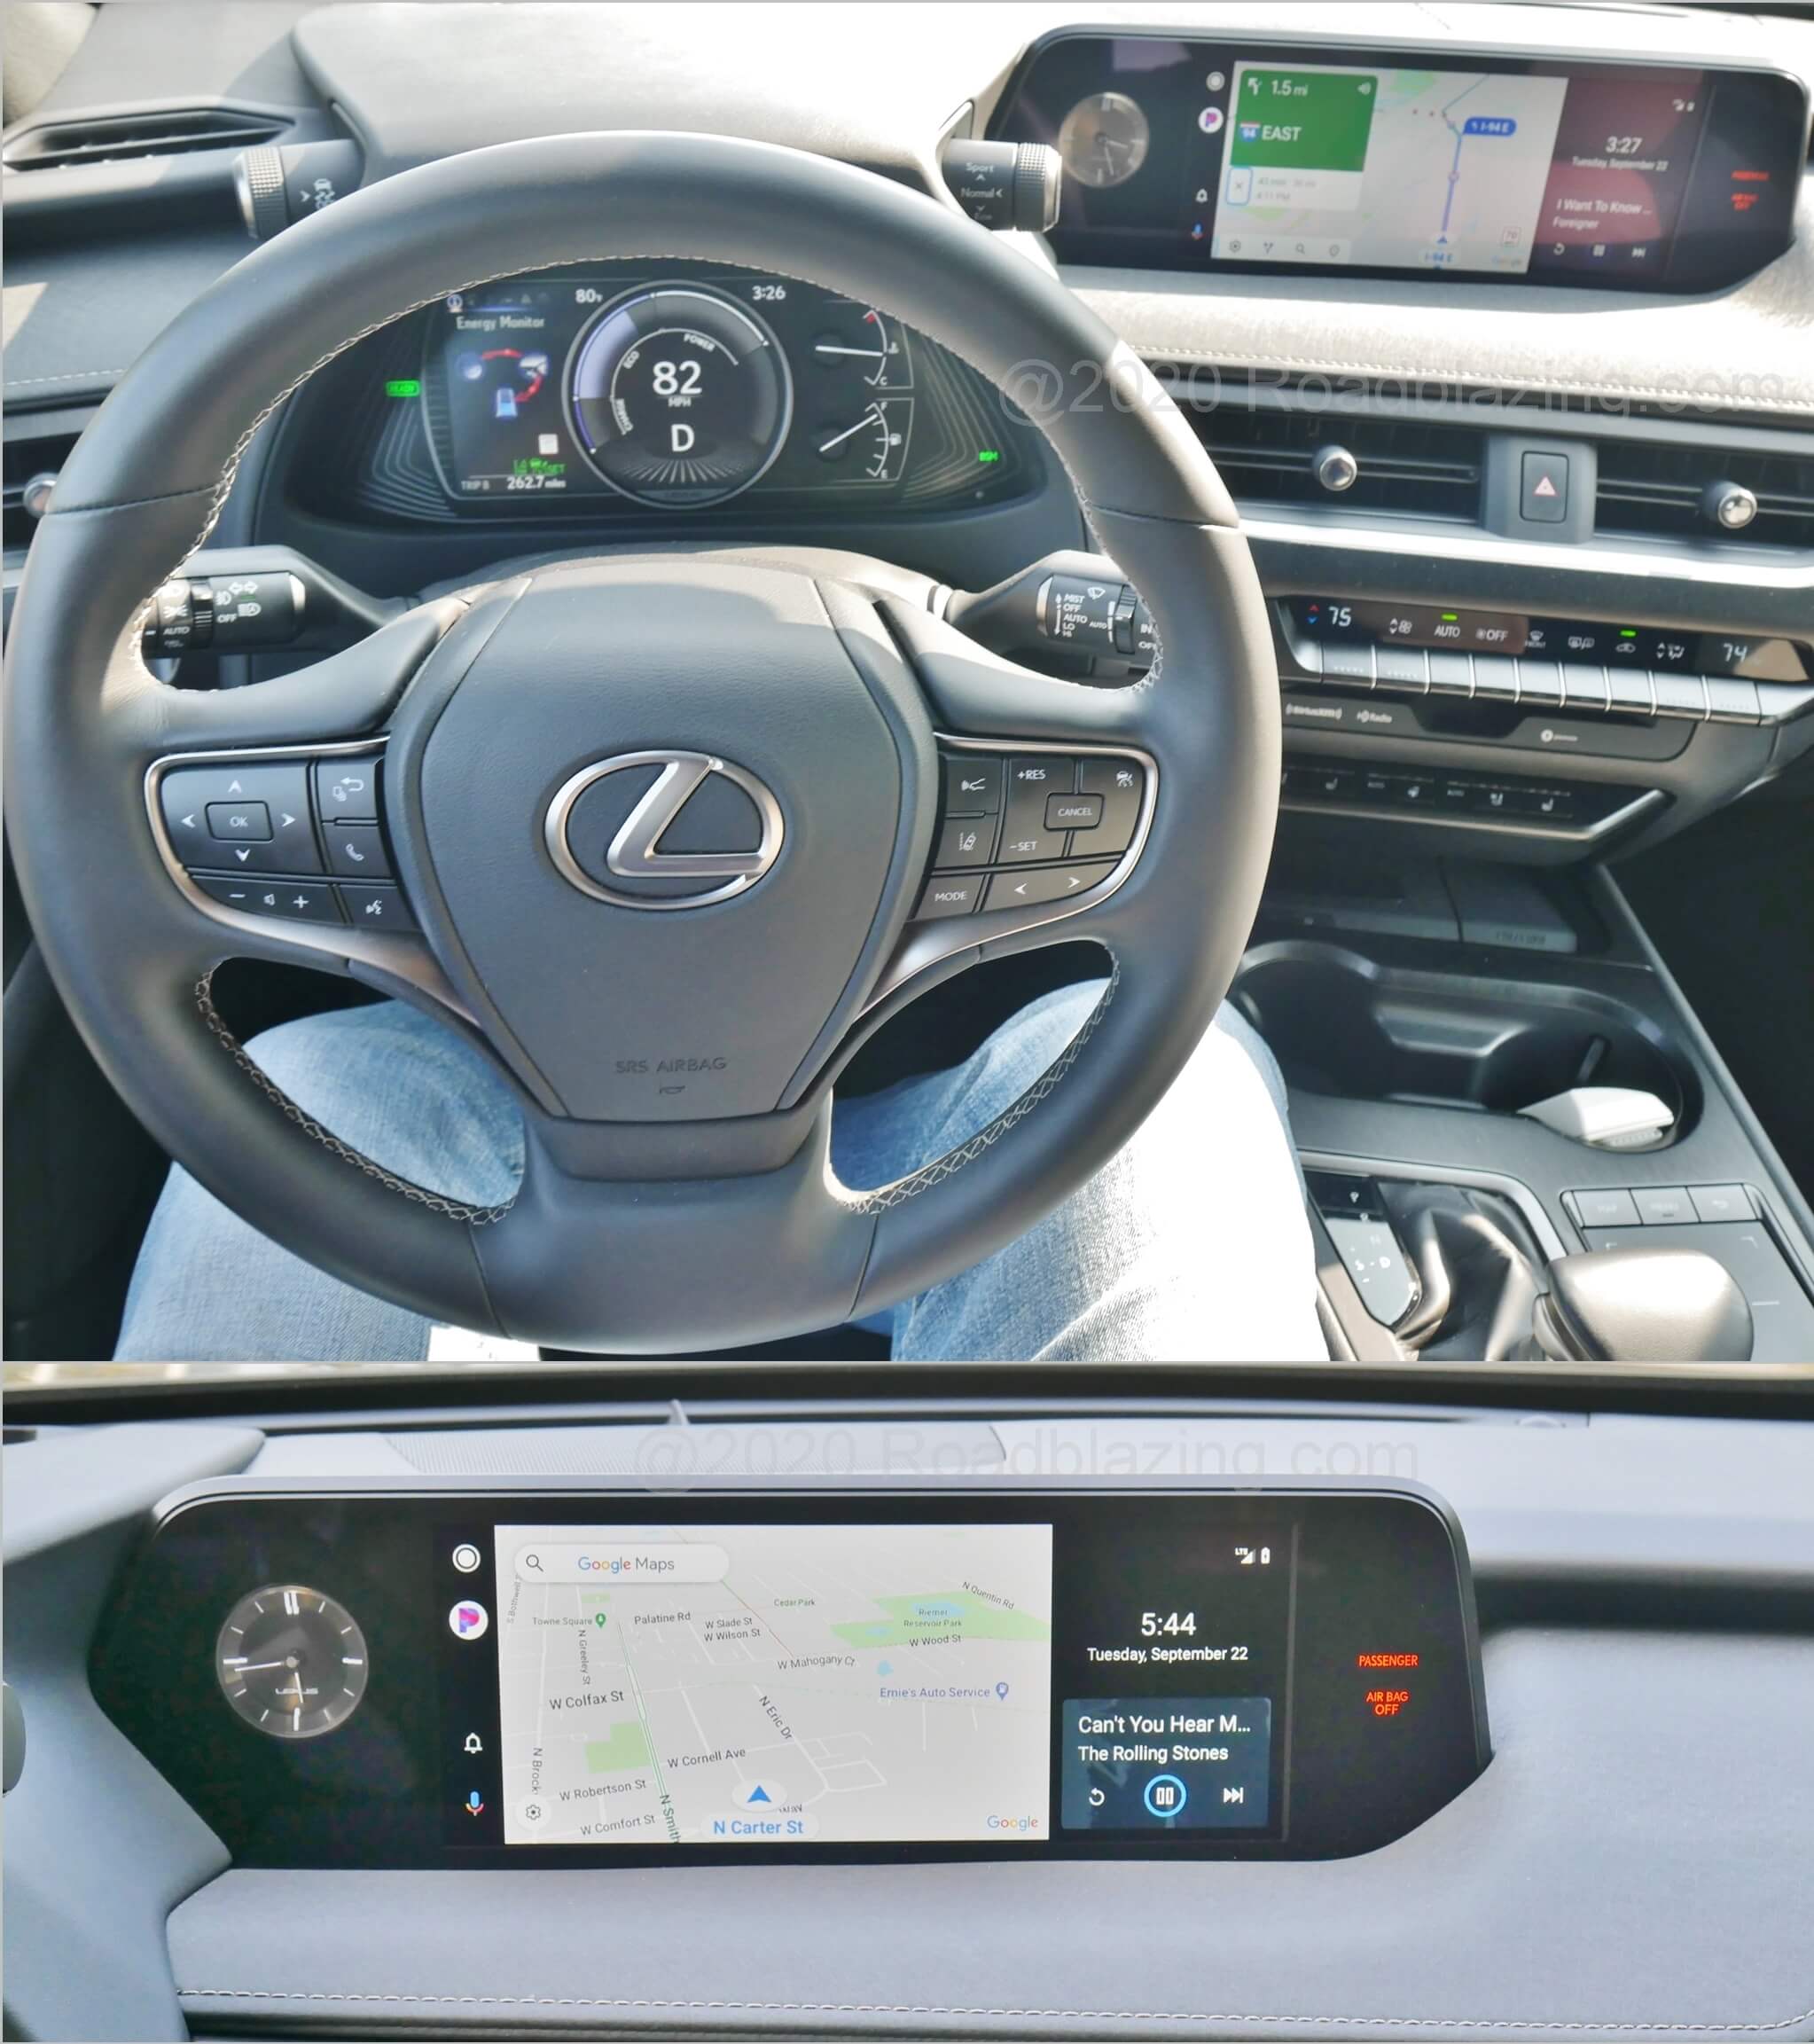 2020 Lexus UX 250h Hybrid AWD: Android Auto projection is new for 2020 MY